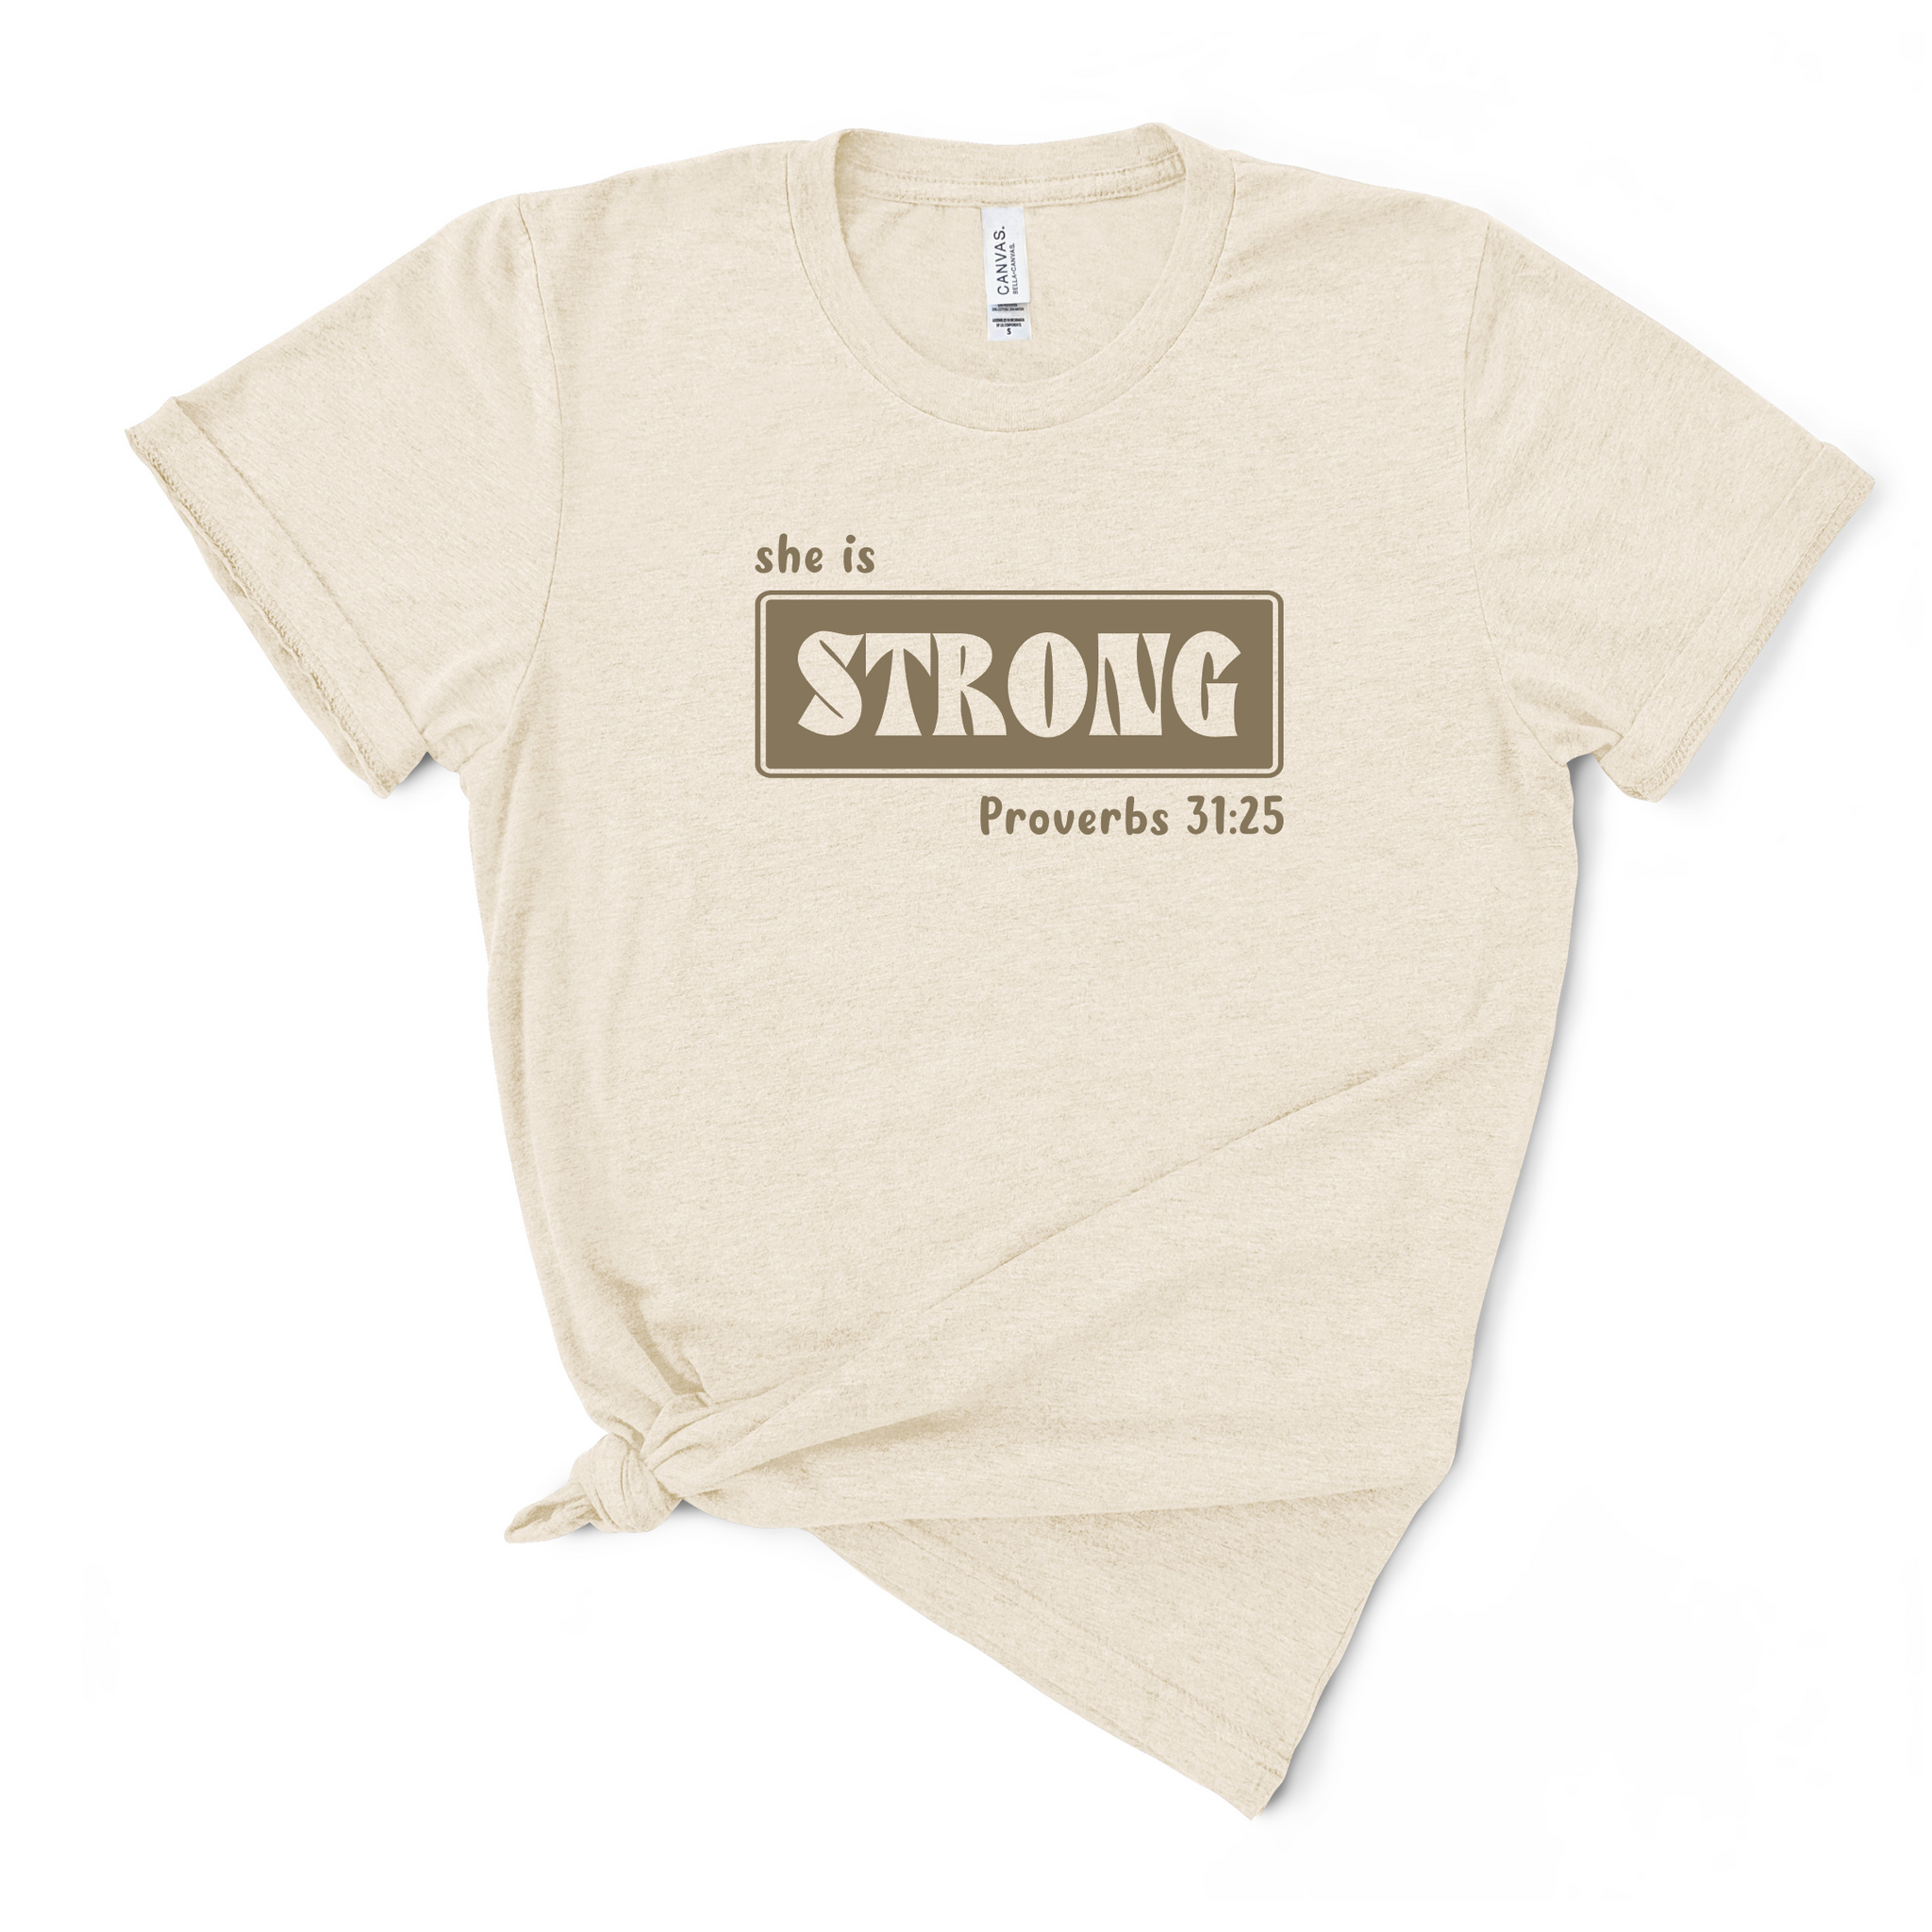 She Is Strong Proverbs 31:25 - Natural Tshirt - Adult & Women's Gym Top - S005